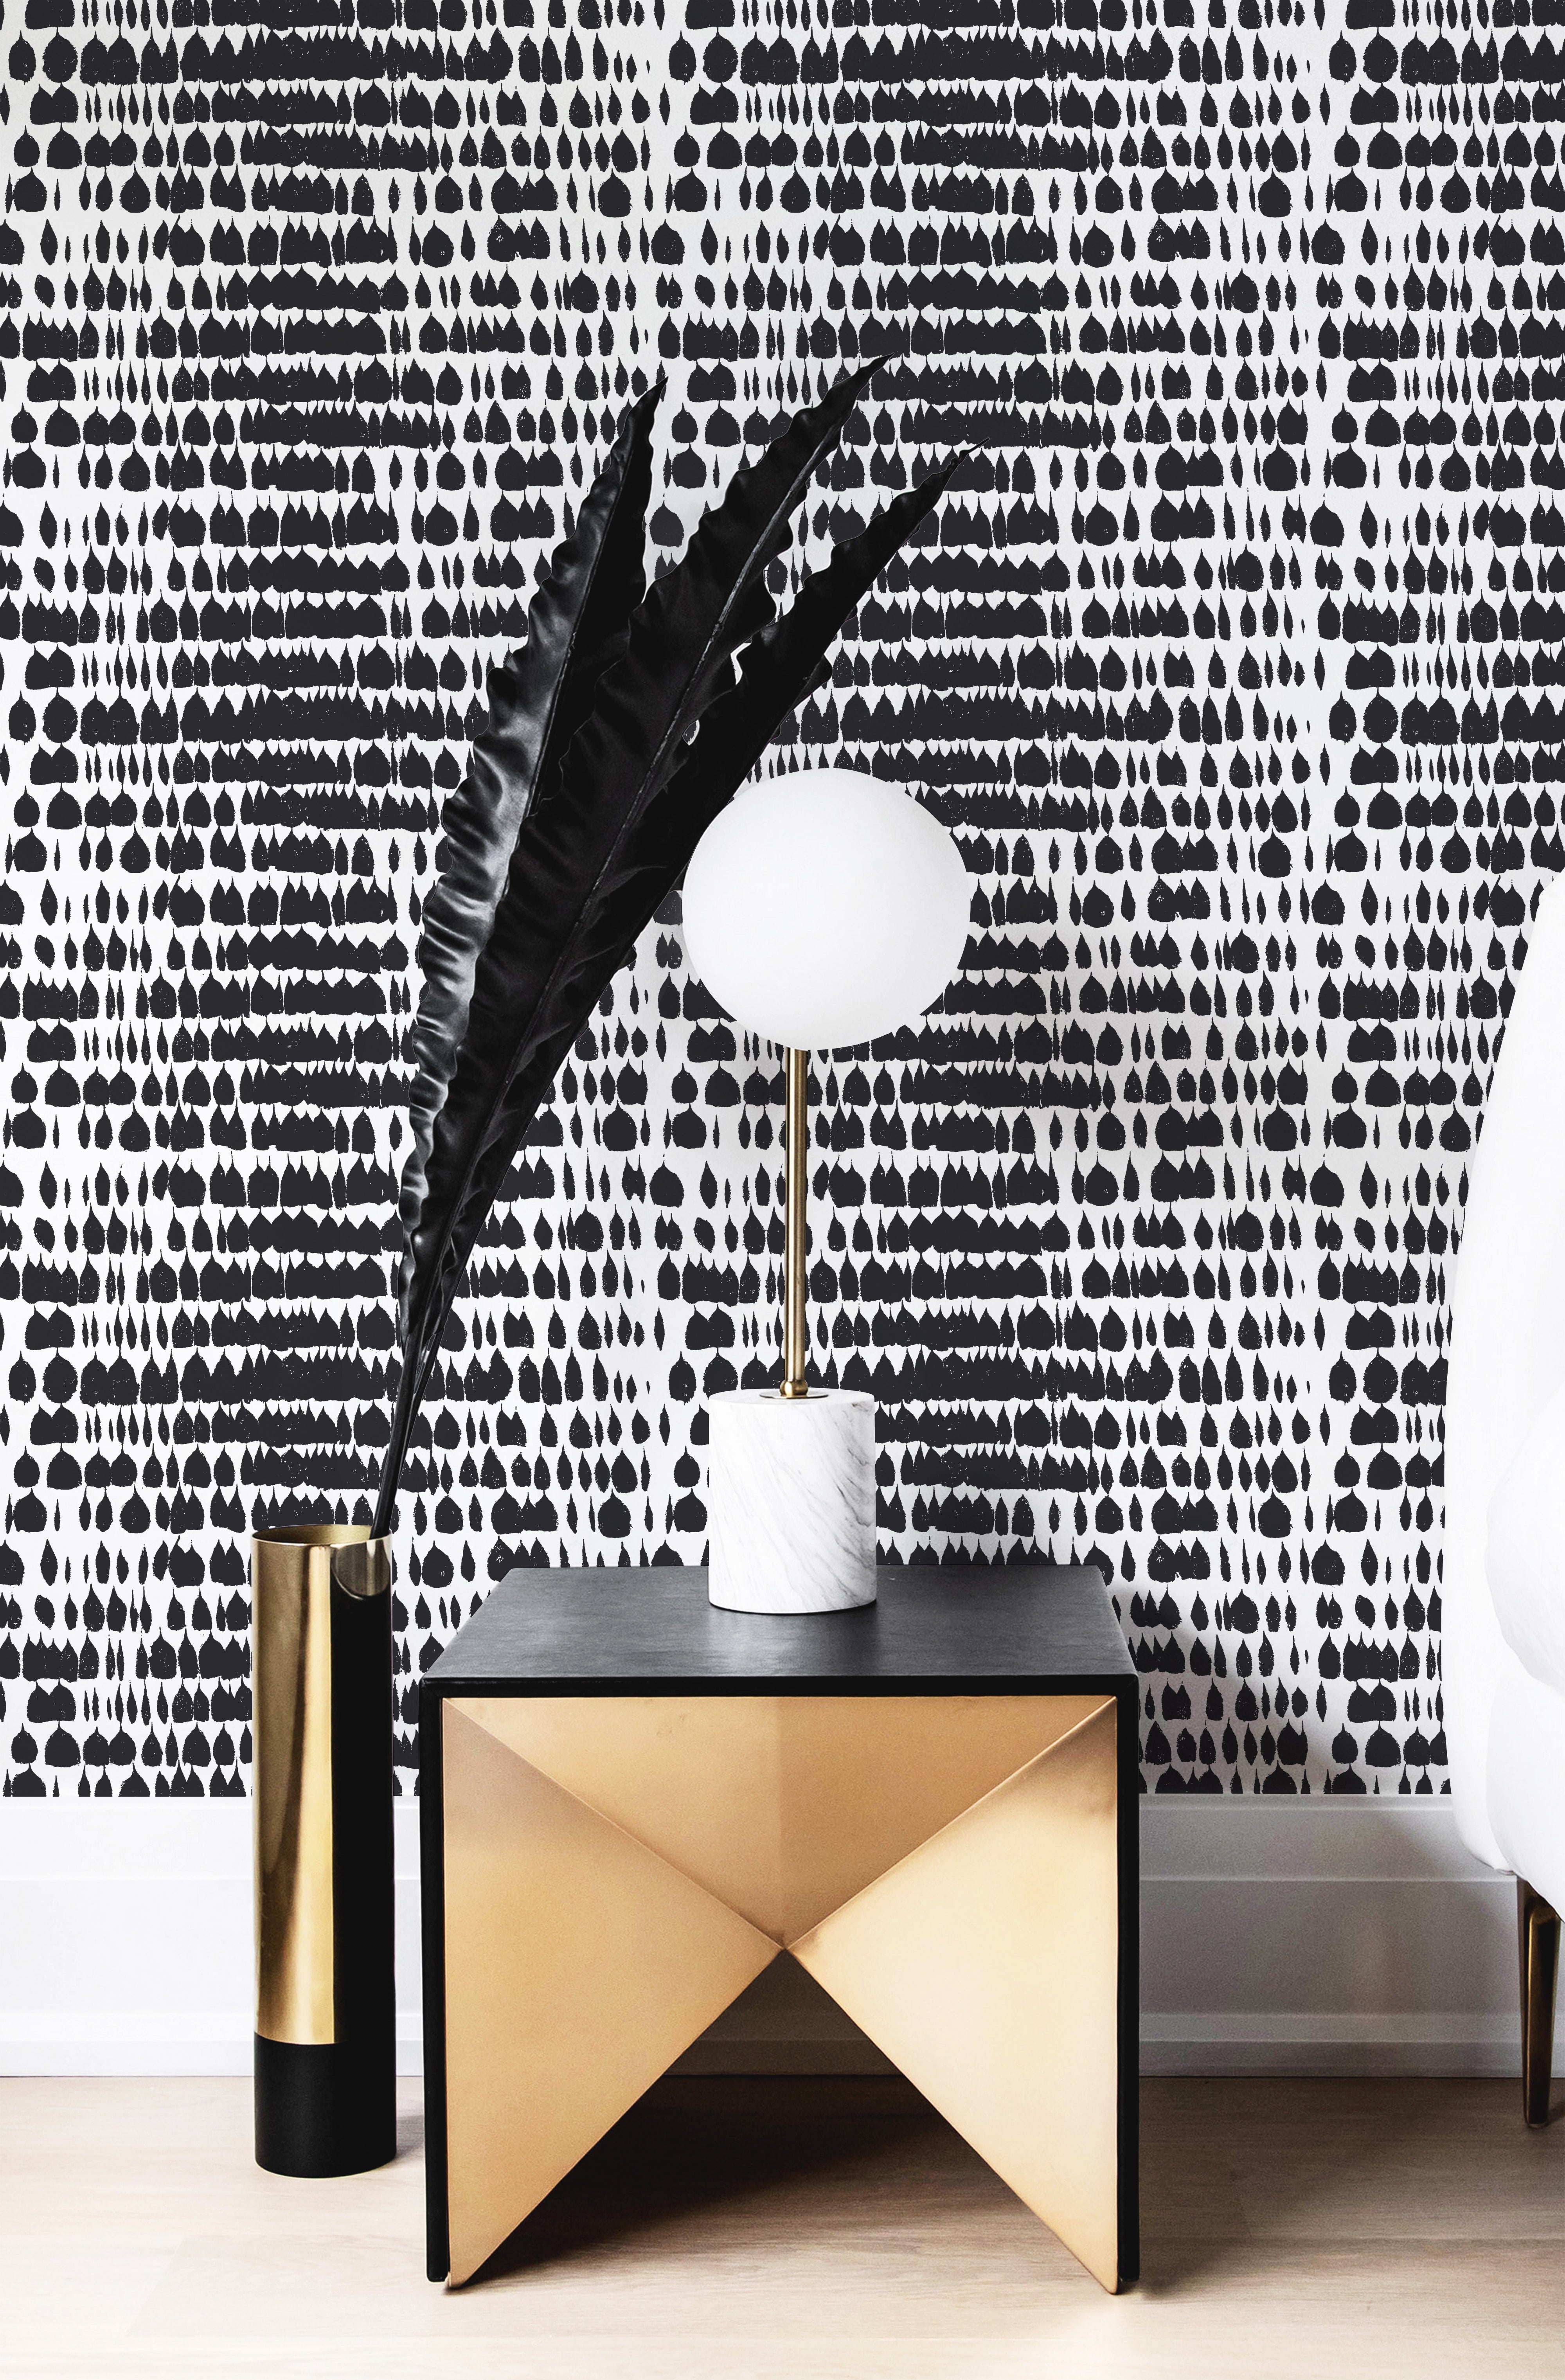 An elegant setting with the Bold Brilliance Wallpaper in a stylish room, complemented by a geometric black and gold table and a modern lamp with a white globe shade. The wallpaper adds a bold and artistic touch, enhancing the sophisticated ambiance of the room.